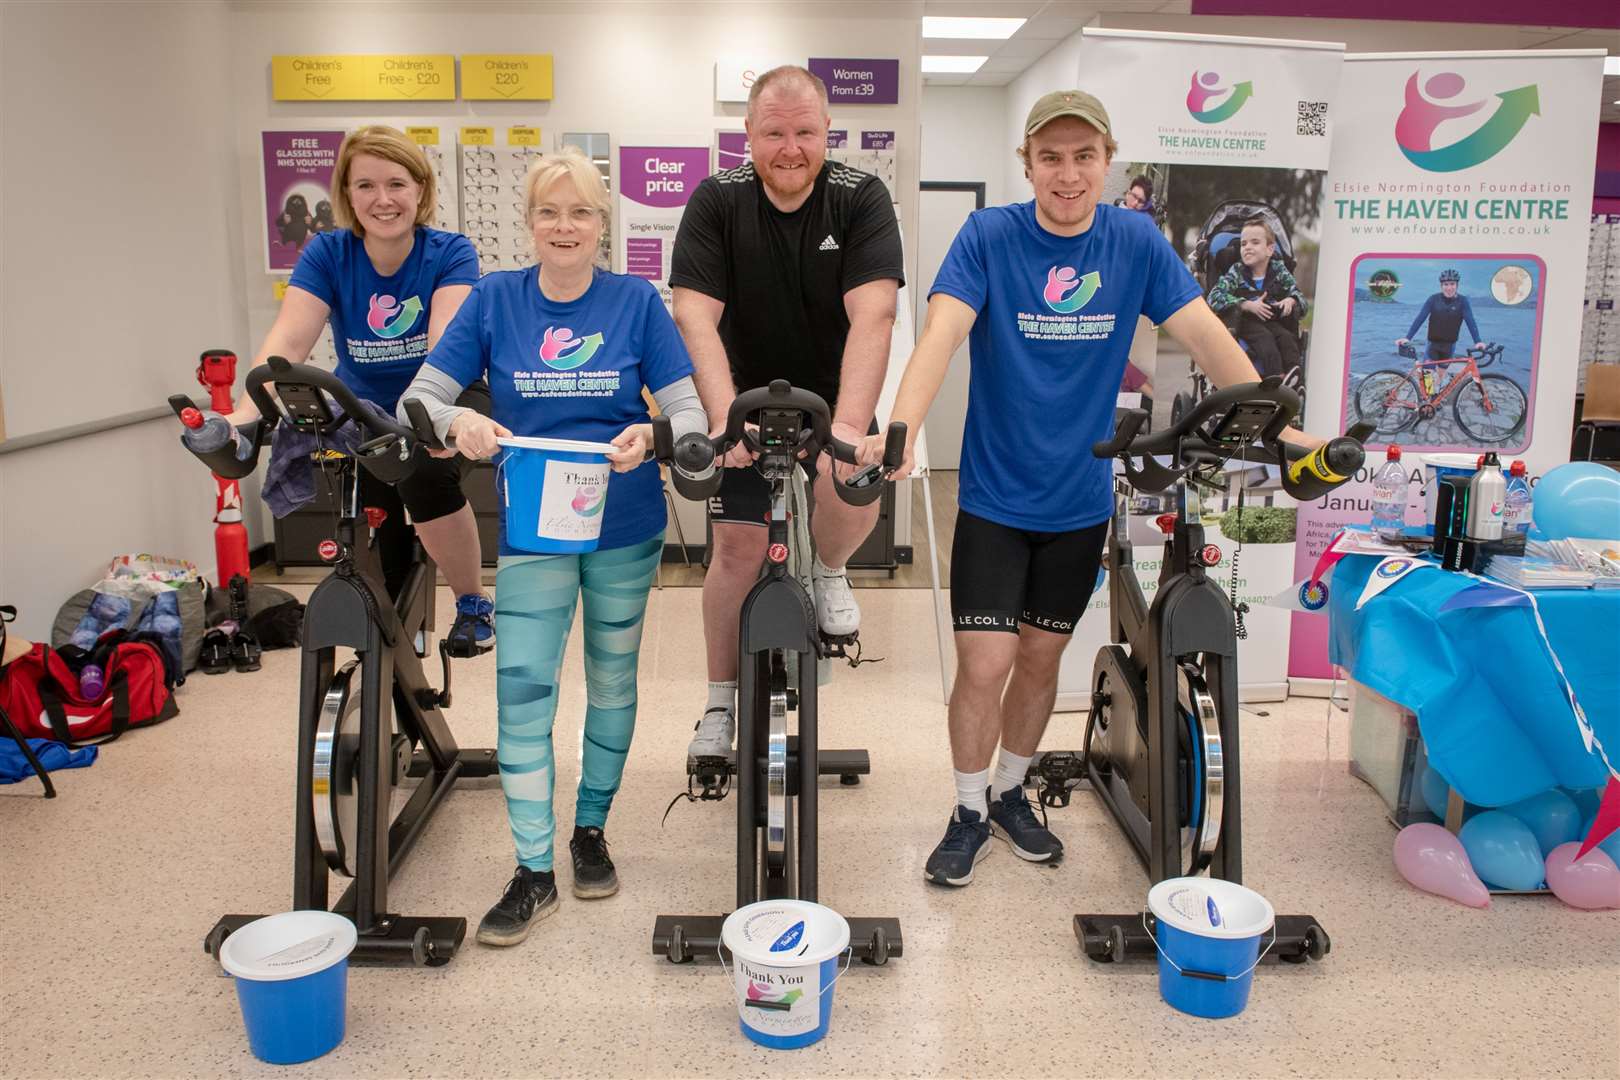 John Prendegast (right) who is undertaking the Tour de Afrique, takes part in a fundraising event with Kirstin Mackay, programme manager for the Elsie Normington Foundation, Scott Murray of Inverness Fitness Studio, and Rona Matheson, fundraiser for the Elsie Normington Foundation. Picture: Callum Mackay..